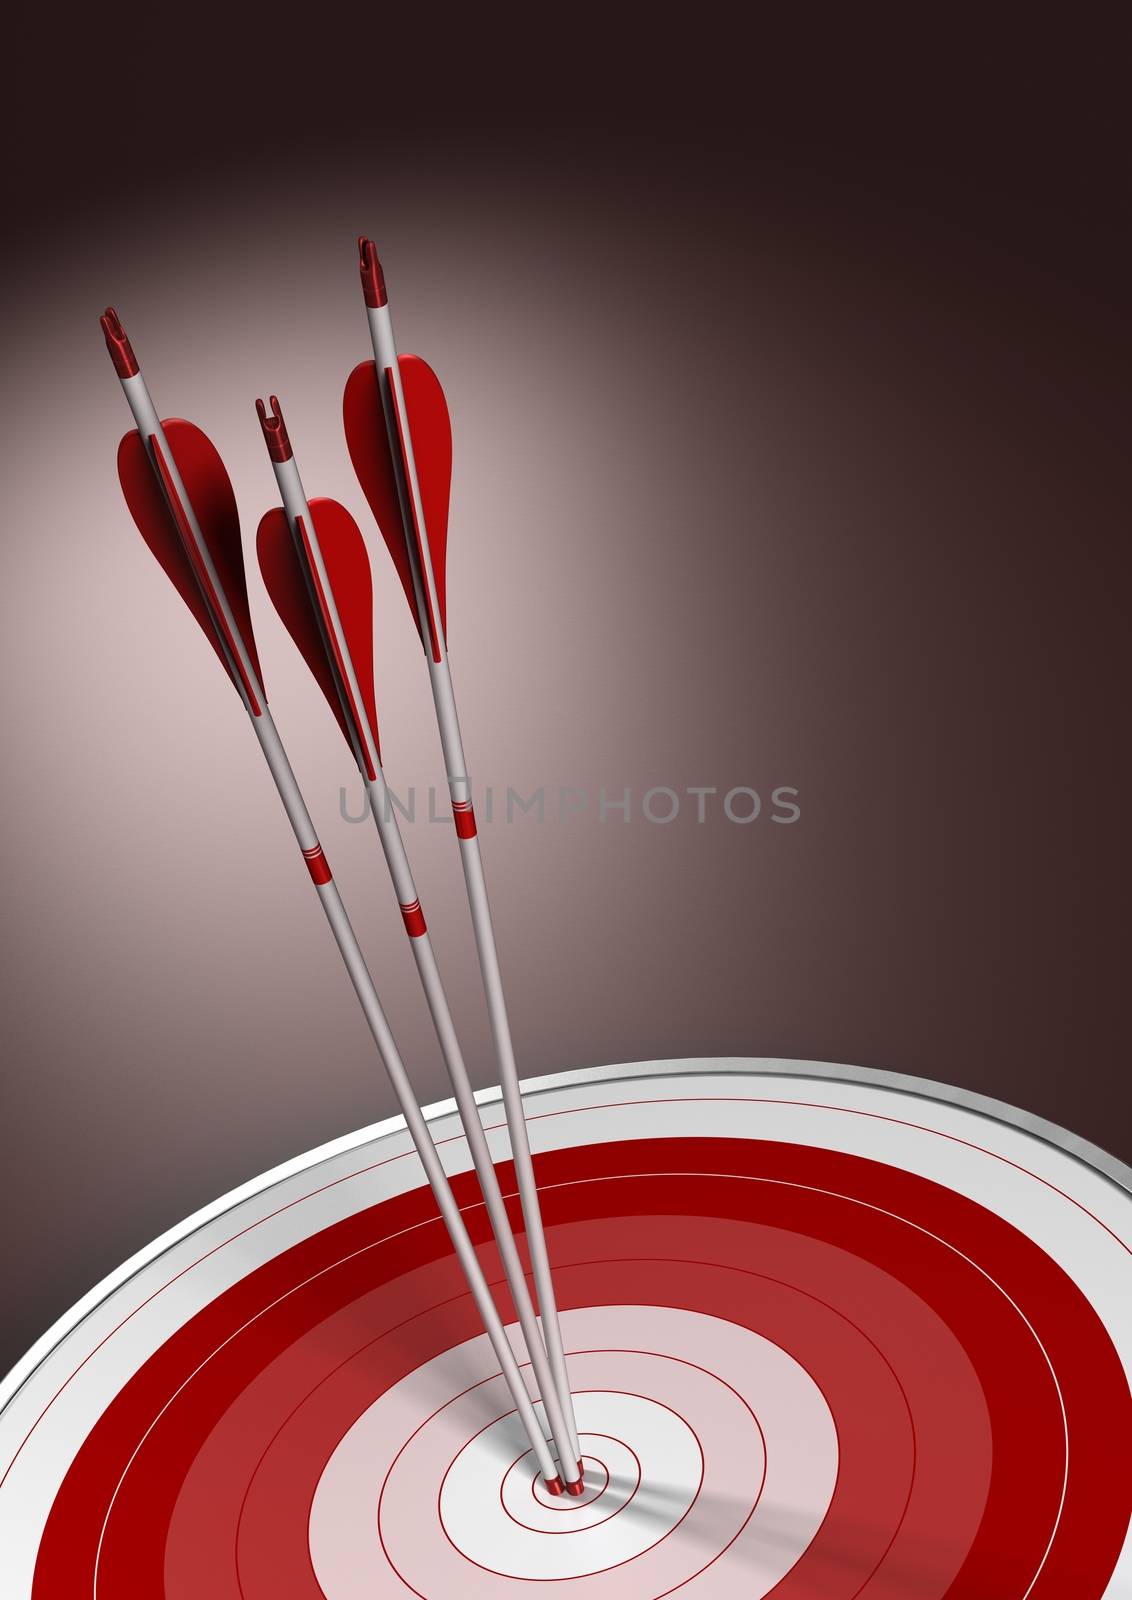 Three arrows hitting the center of a red target, vectical business concept background with room for text.